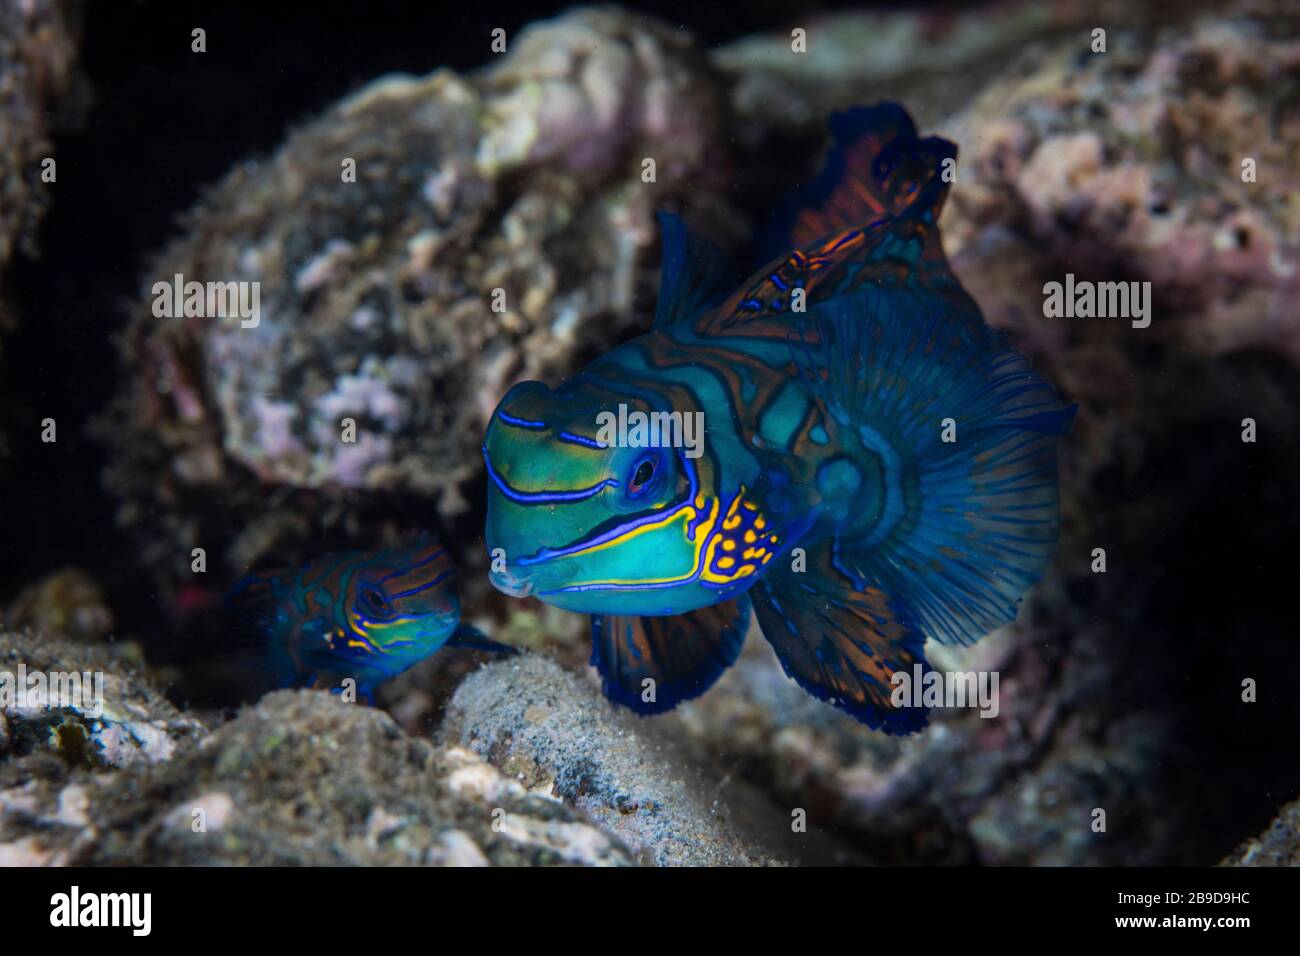 A mandarinfish, Synchiropus splendidus, searches for a mate at dusk. Stock Photo